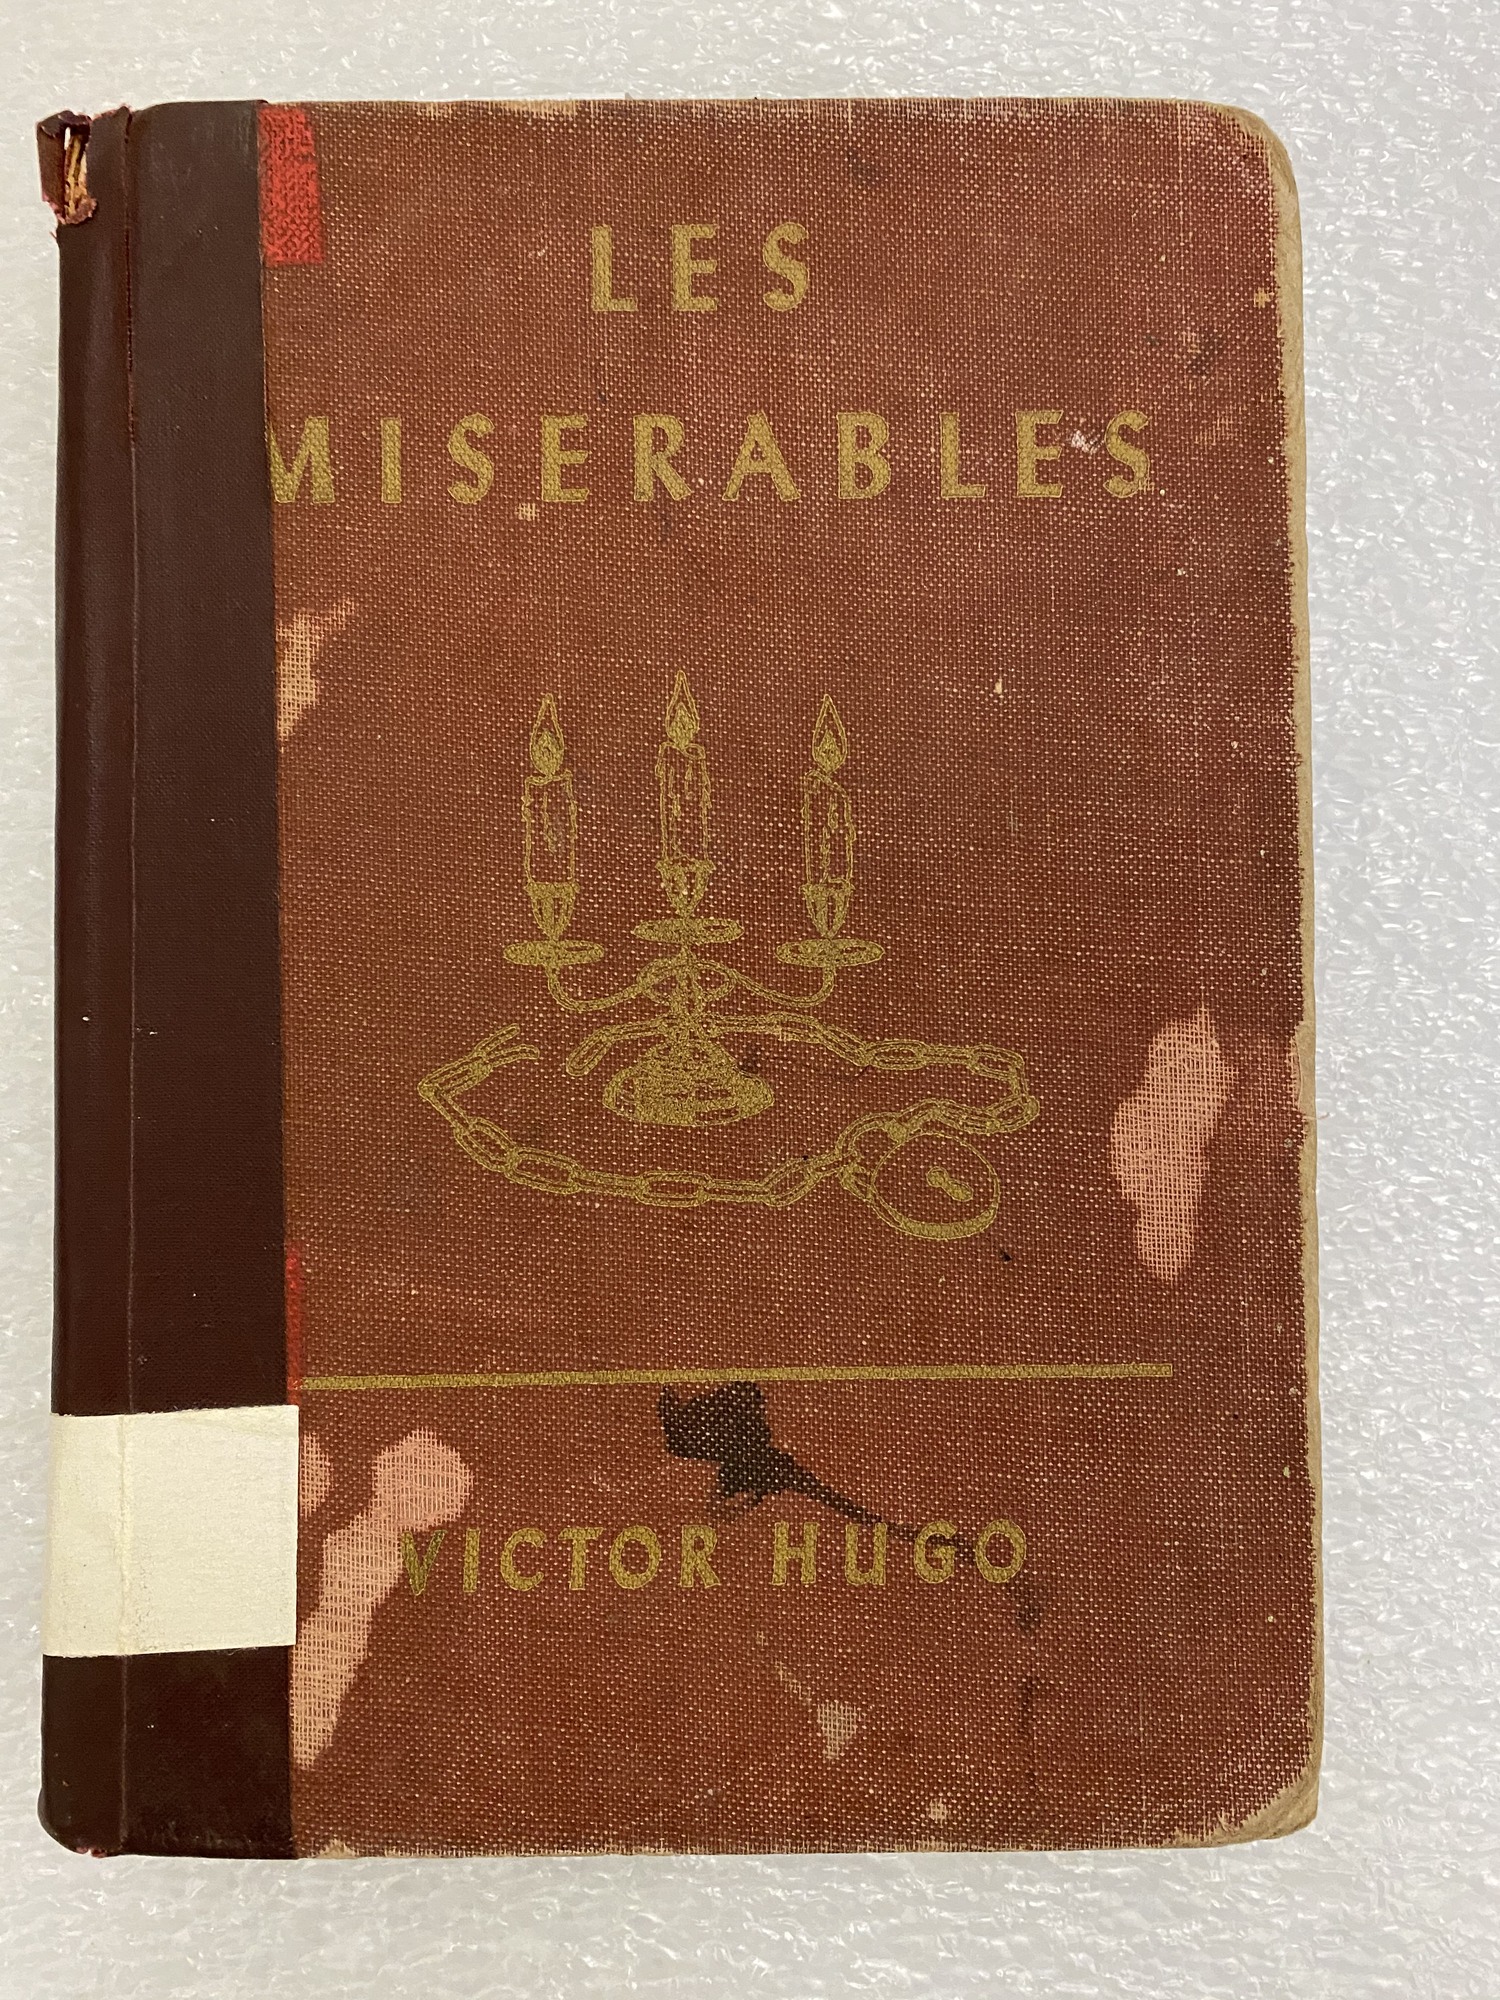 Cover of the book Les Miserables. The cover is a faded red with gold lettering and an image of a candle stick holder with a chain and lock at its base. The spine side of the book has been repaired with dark red book tape